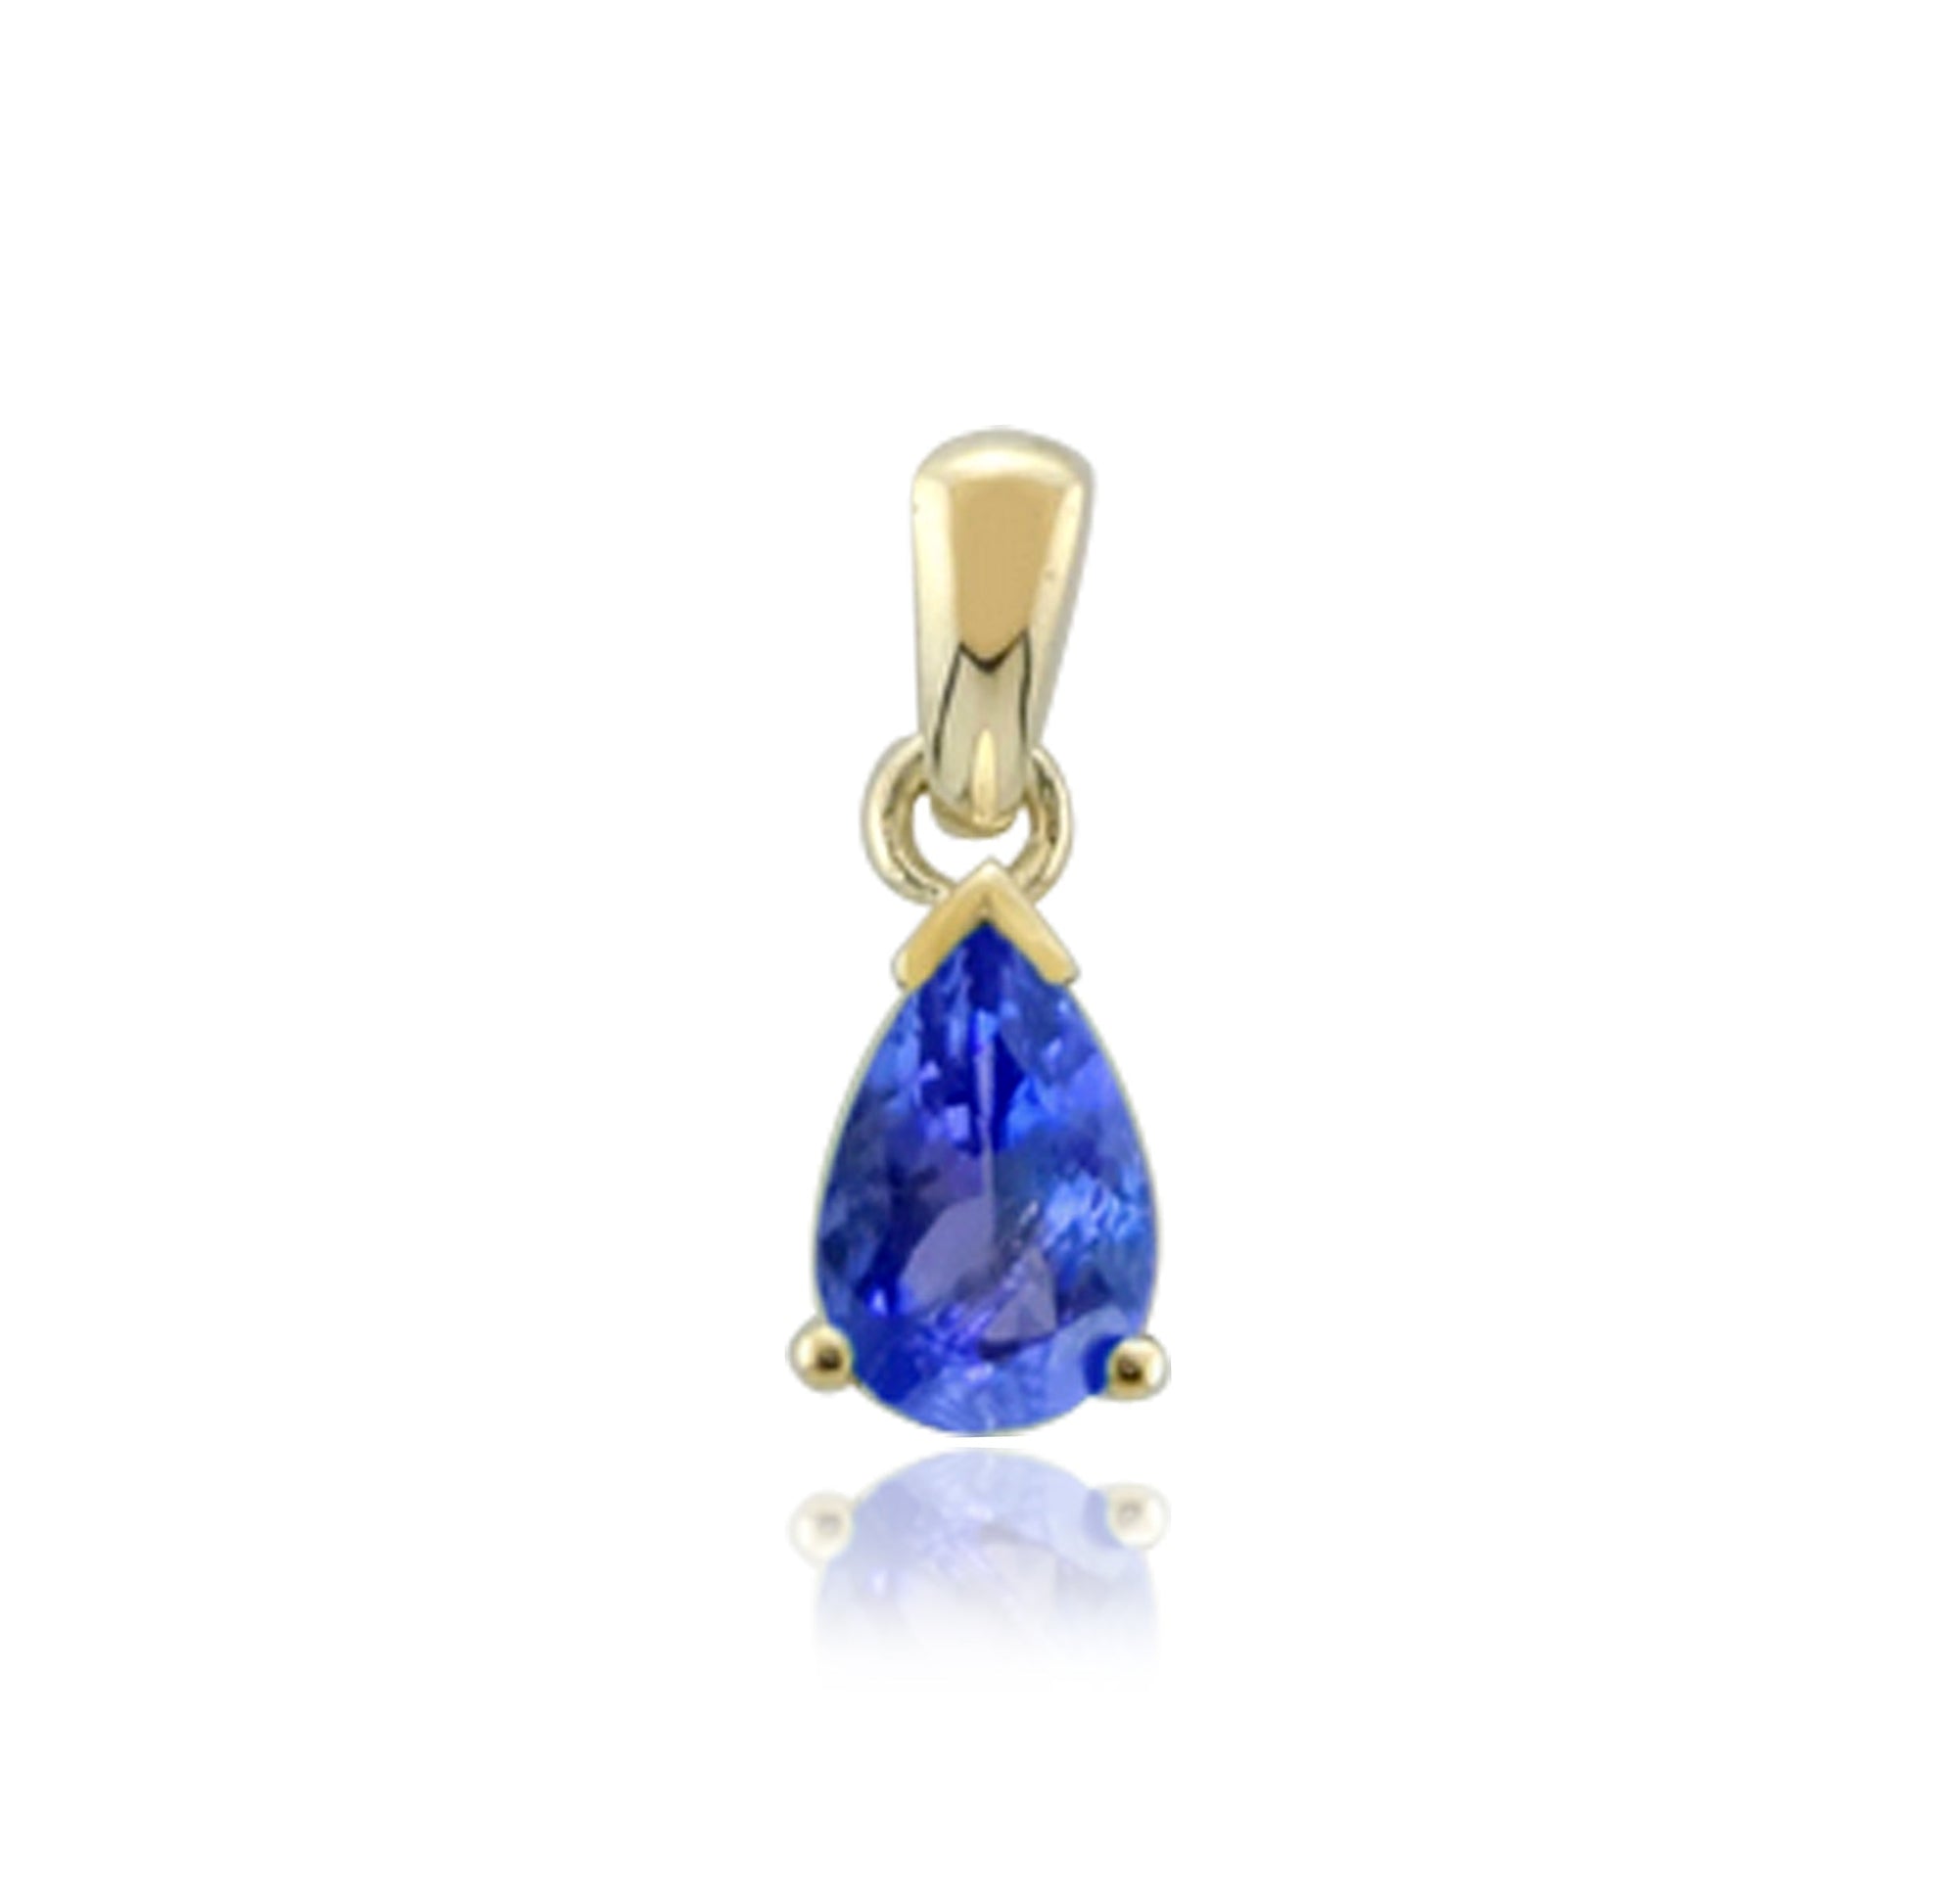 9ct gold 7x5mm pear shape tanzanite claw set double gallery pendant